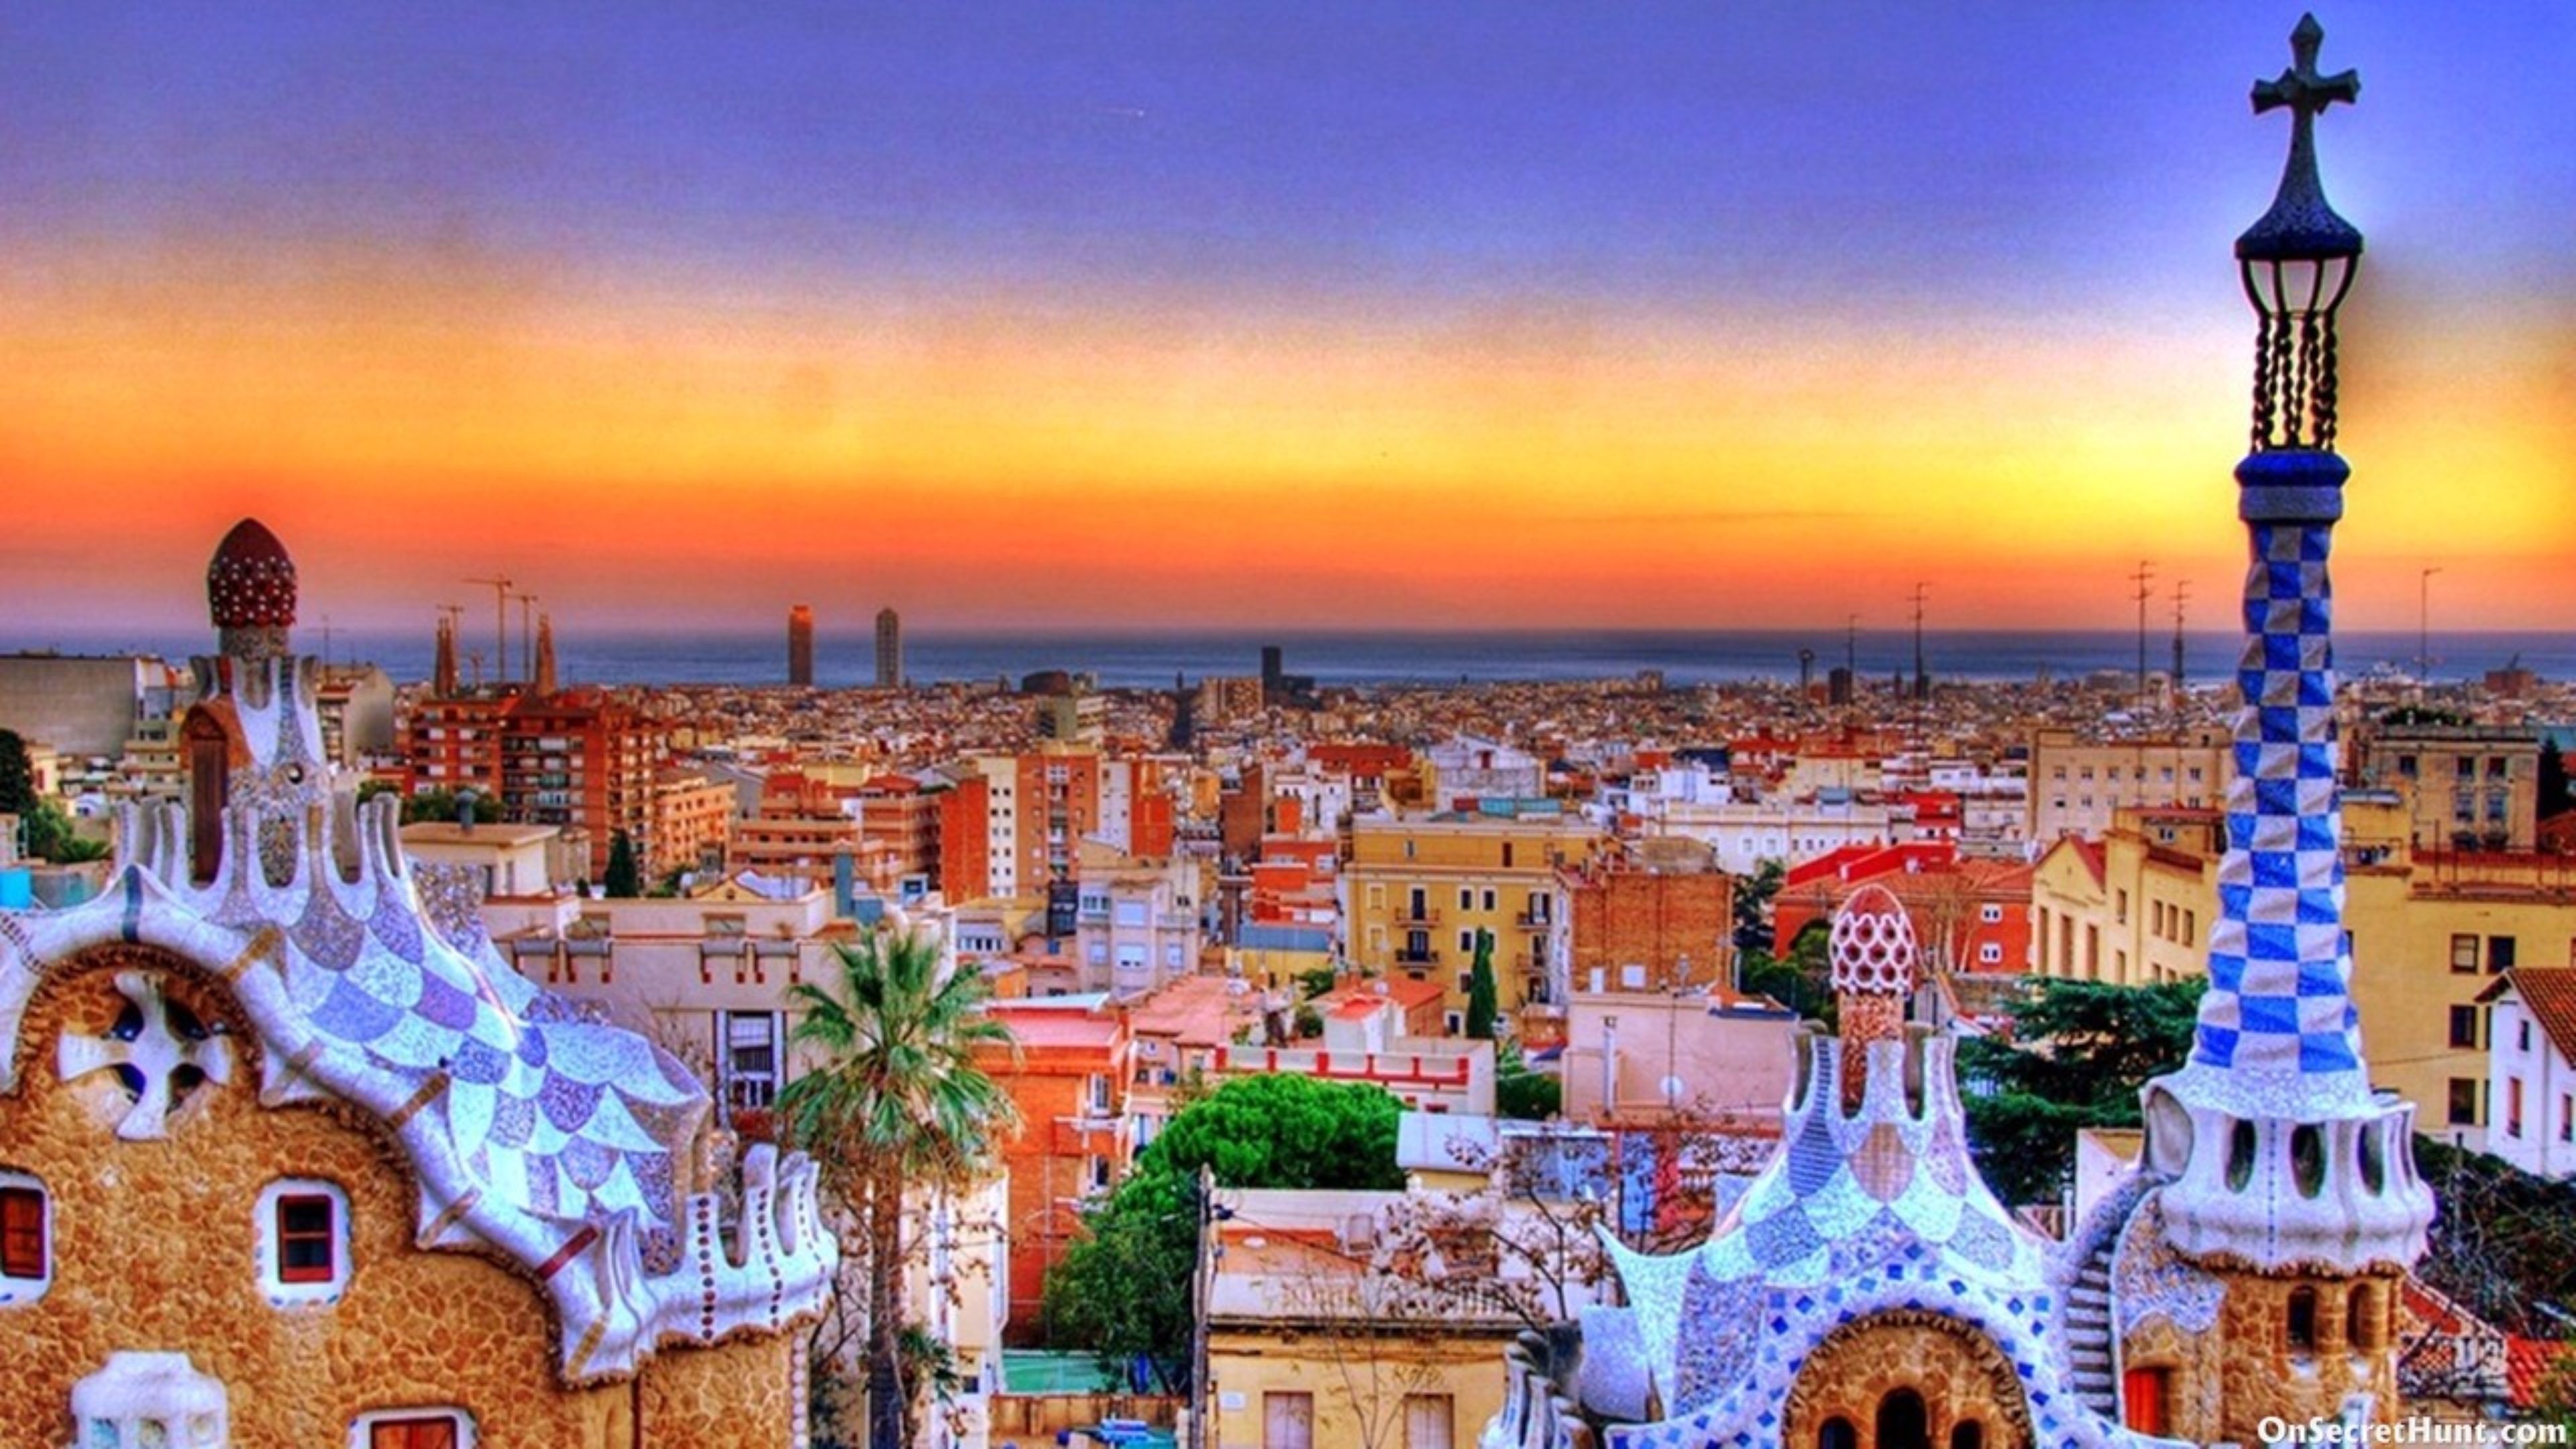 48 Barcelona Spain Wallpaper On Wallpapersafari Find over 100+ of the best free pain images. 48 barcelona spain wallpaper on